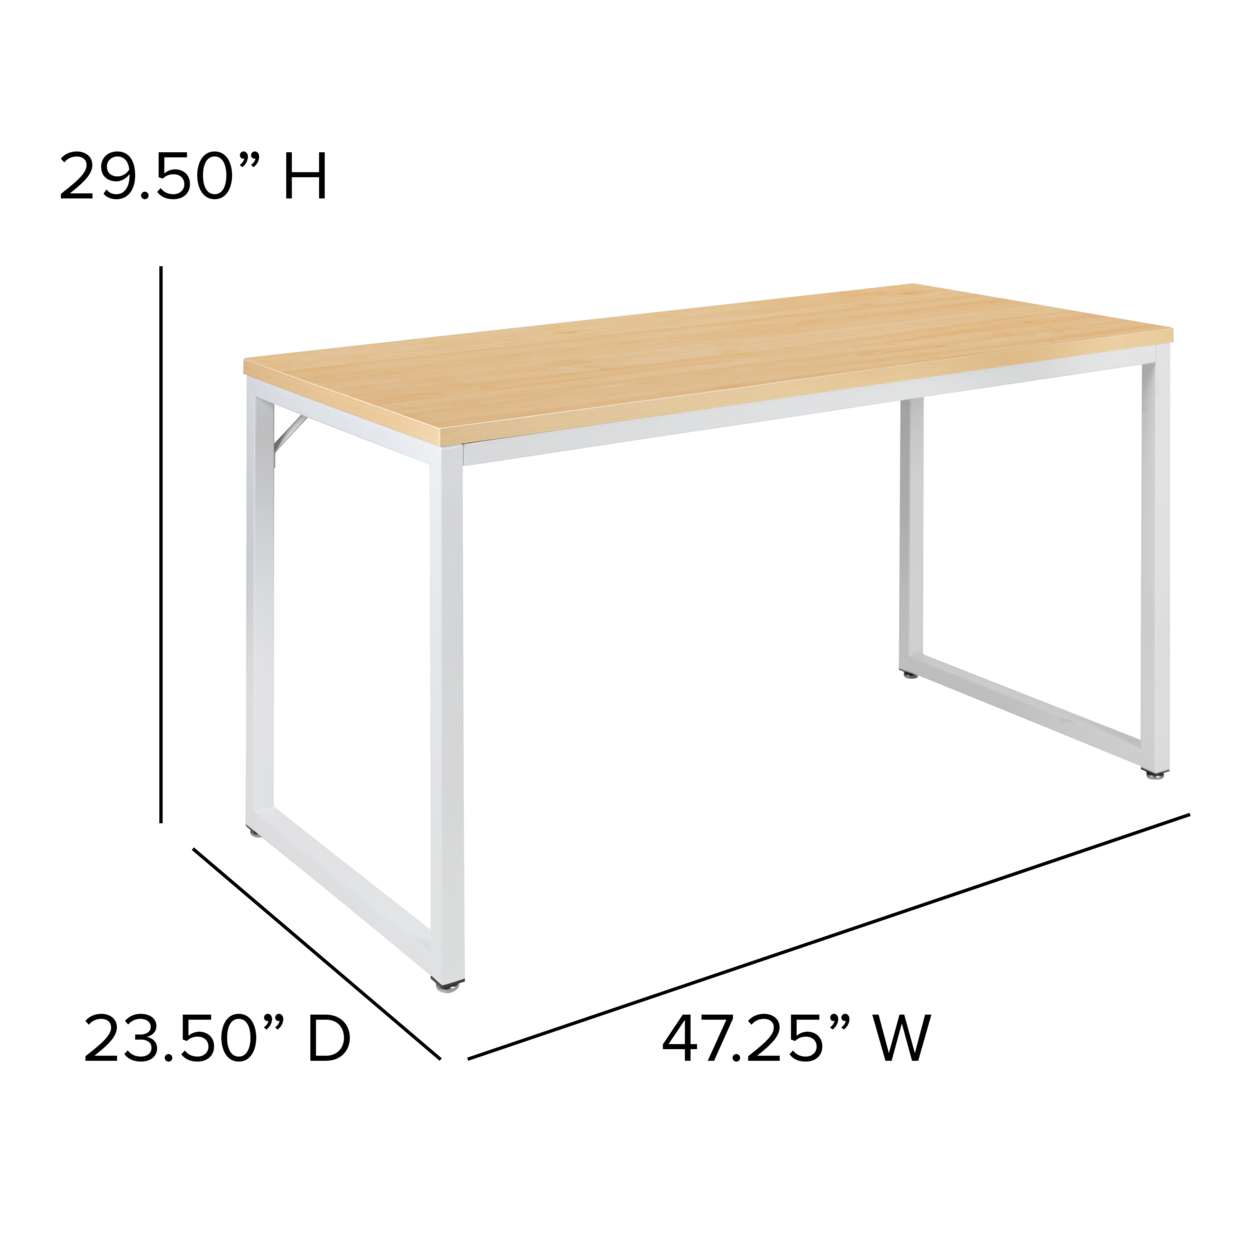 Tiverton Industrial Modern Desk - Commercial Grade Office Computer Desk And Home Office Desk - 47 Long (Maple And White)